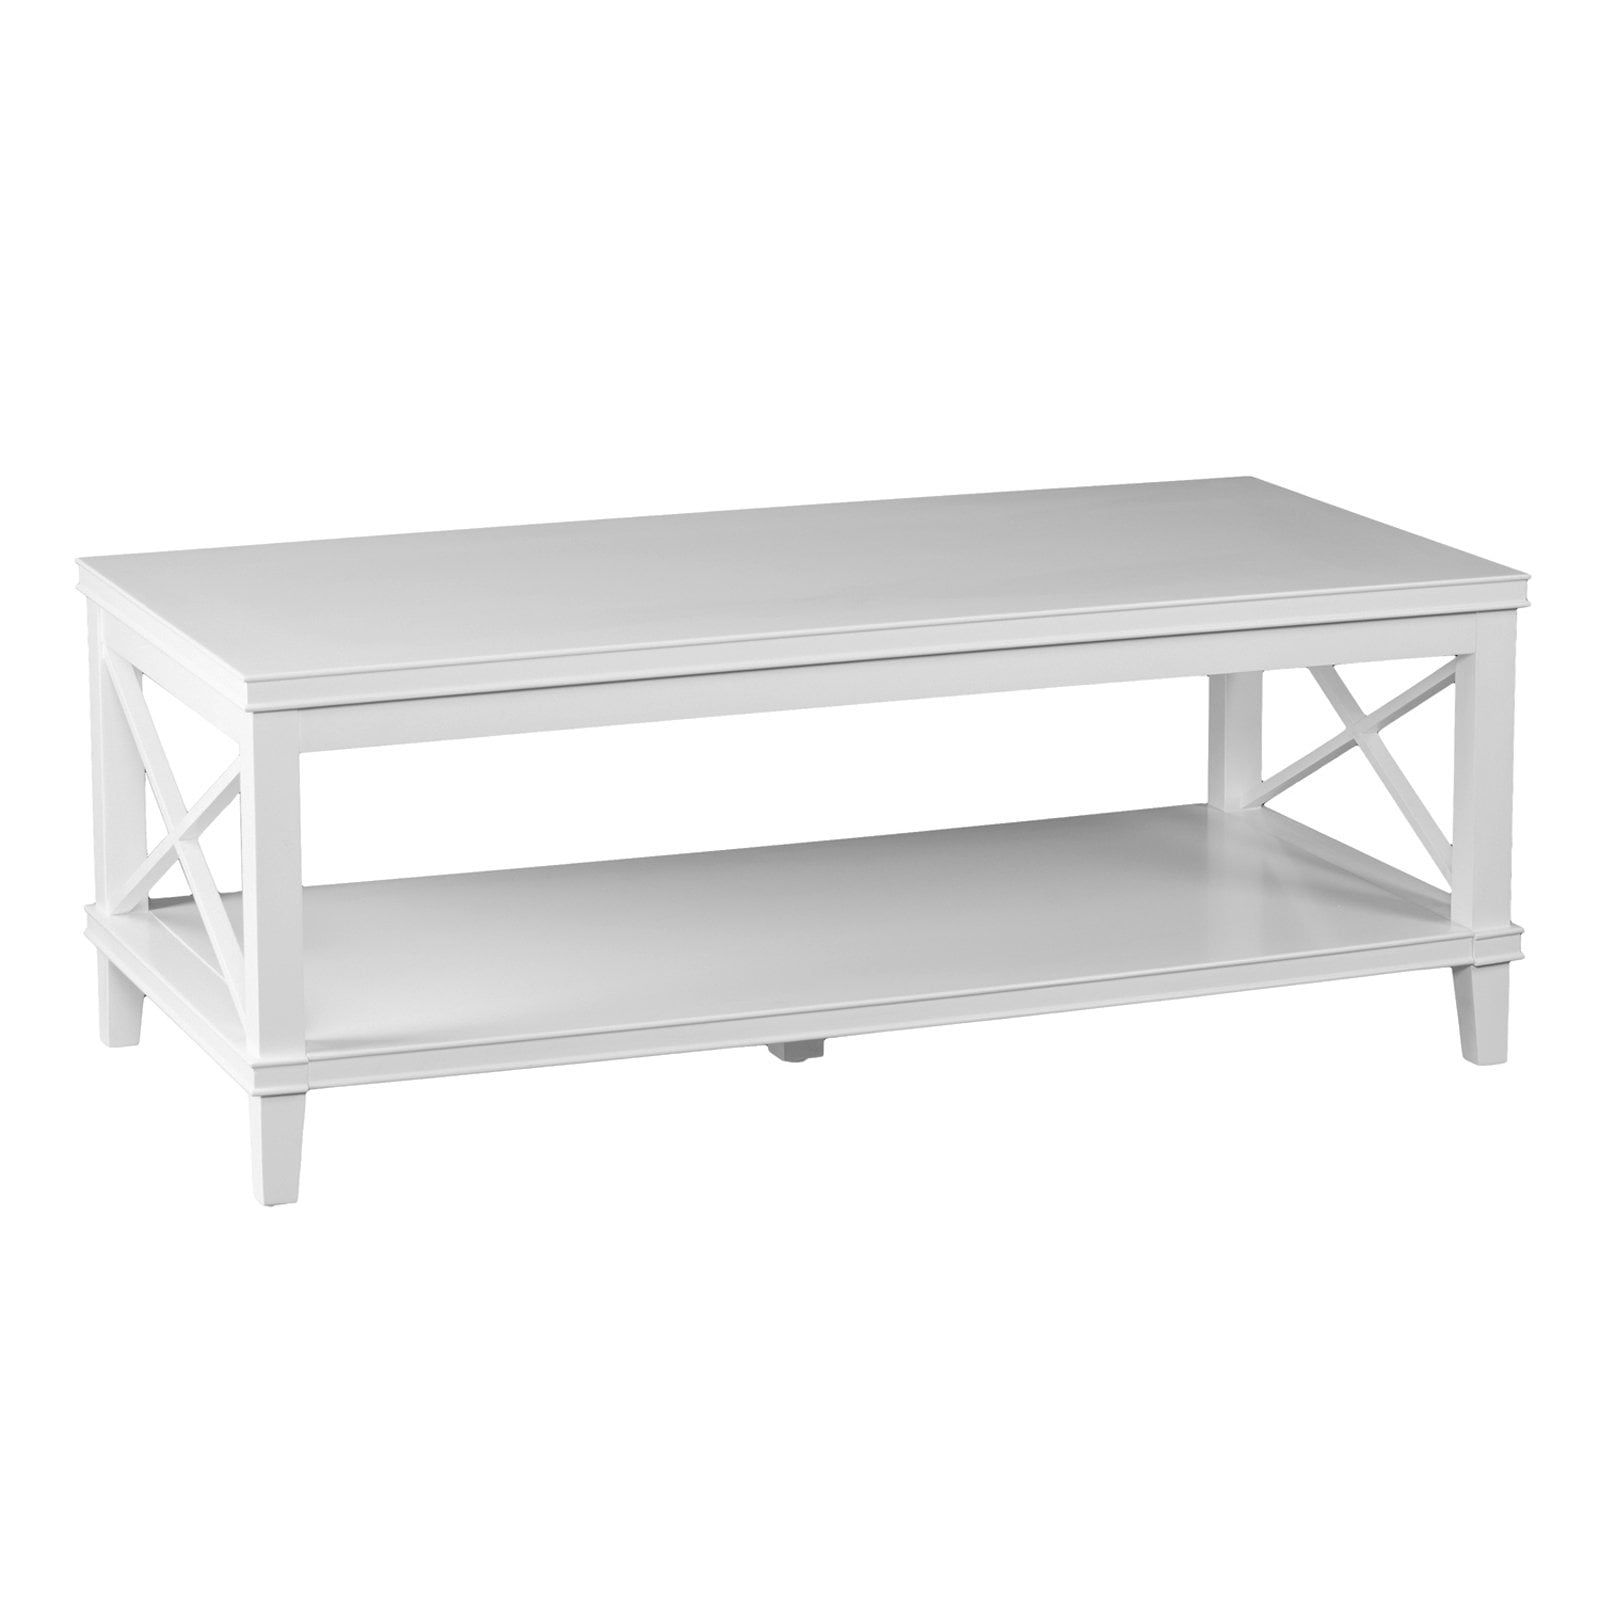 Southern Enterprises Larksmill Coffee Table – Walmart Inside Southern Enterprises Larksmill Coffee Tables (Photo 3 of 6)